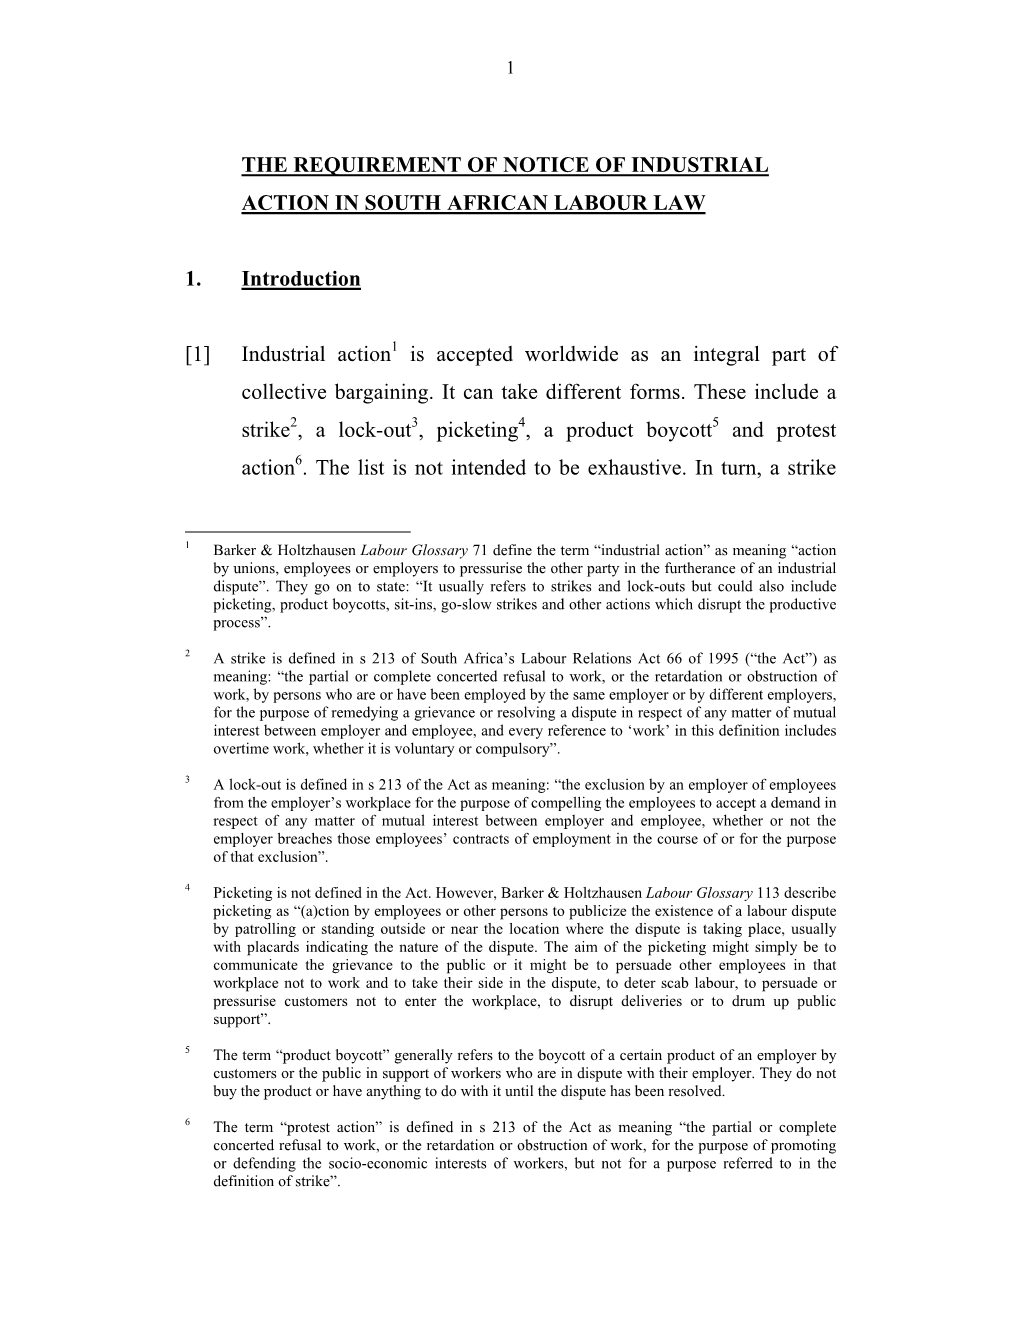 The Requirement of Notice of Industrial Action in South African Labour Law